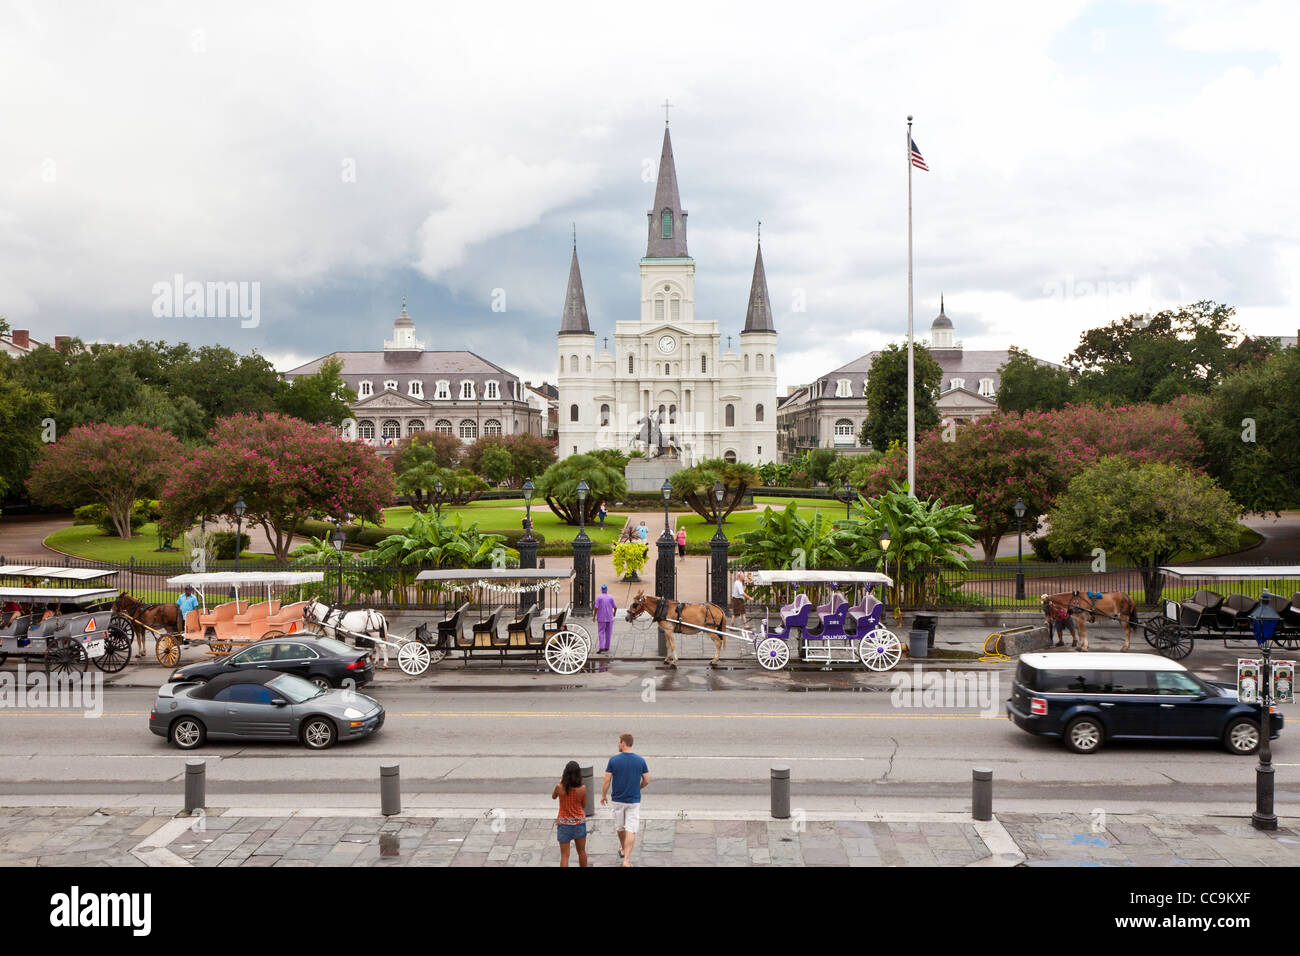 Horse and carriage vendors line up on Decatur Street in front of Jackson Square in the French Quarter of New Orleans, LA Stock Photo